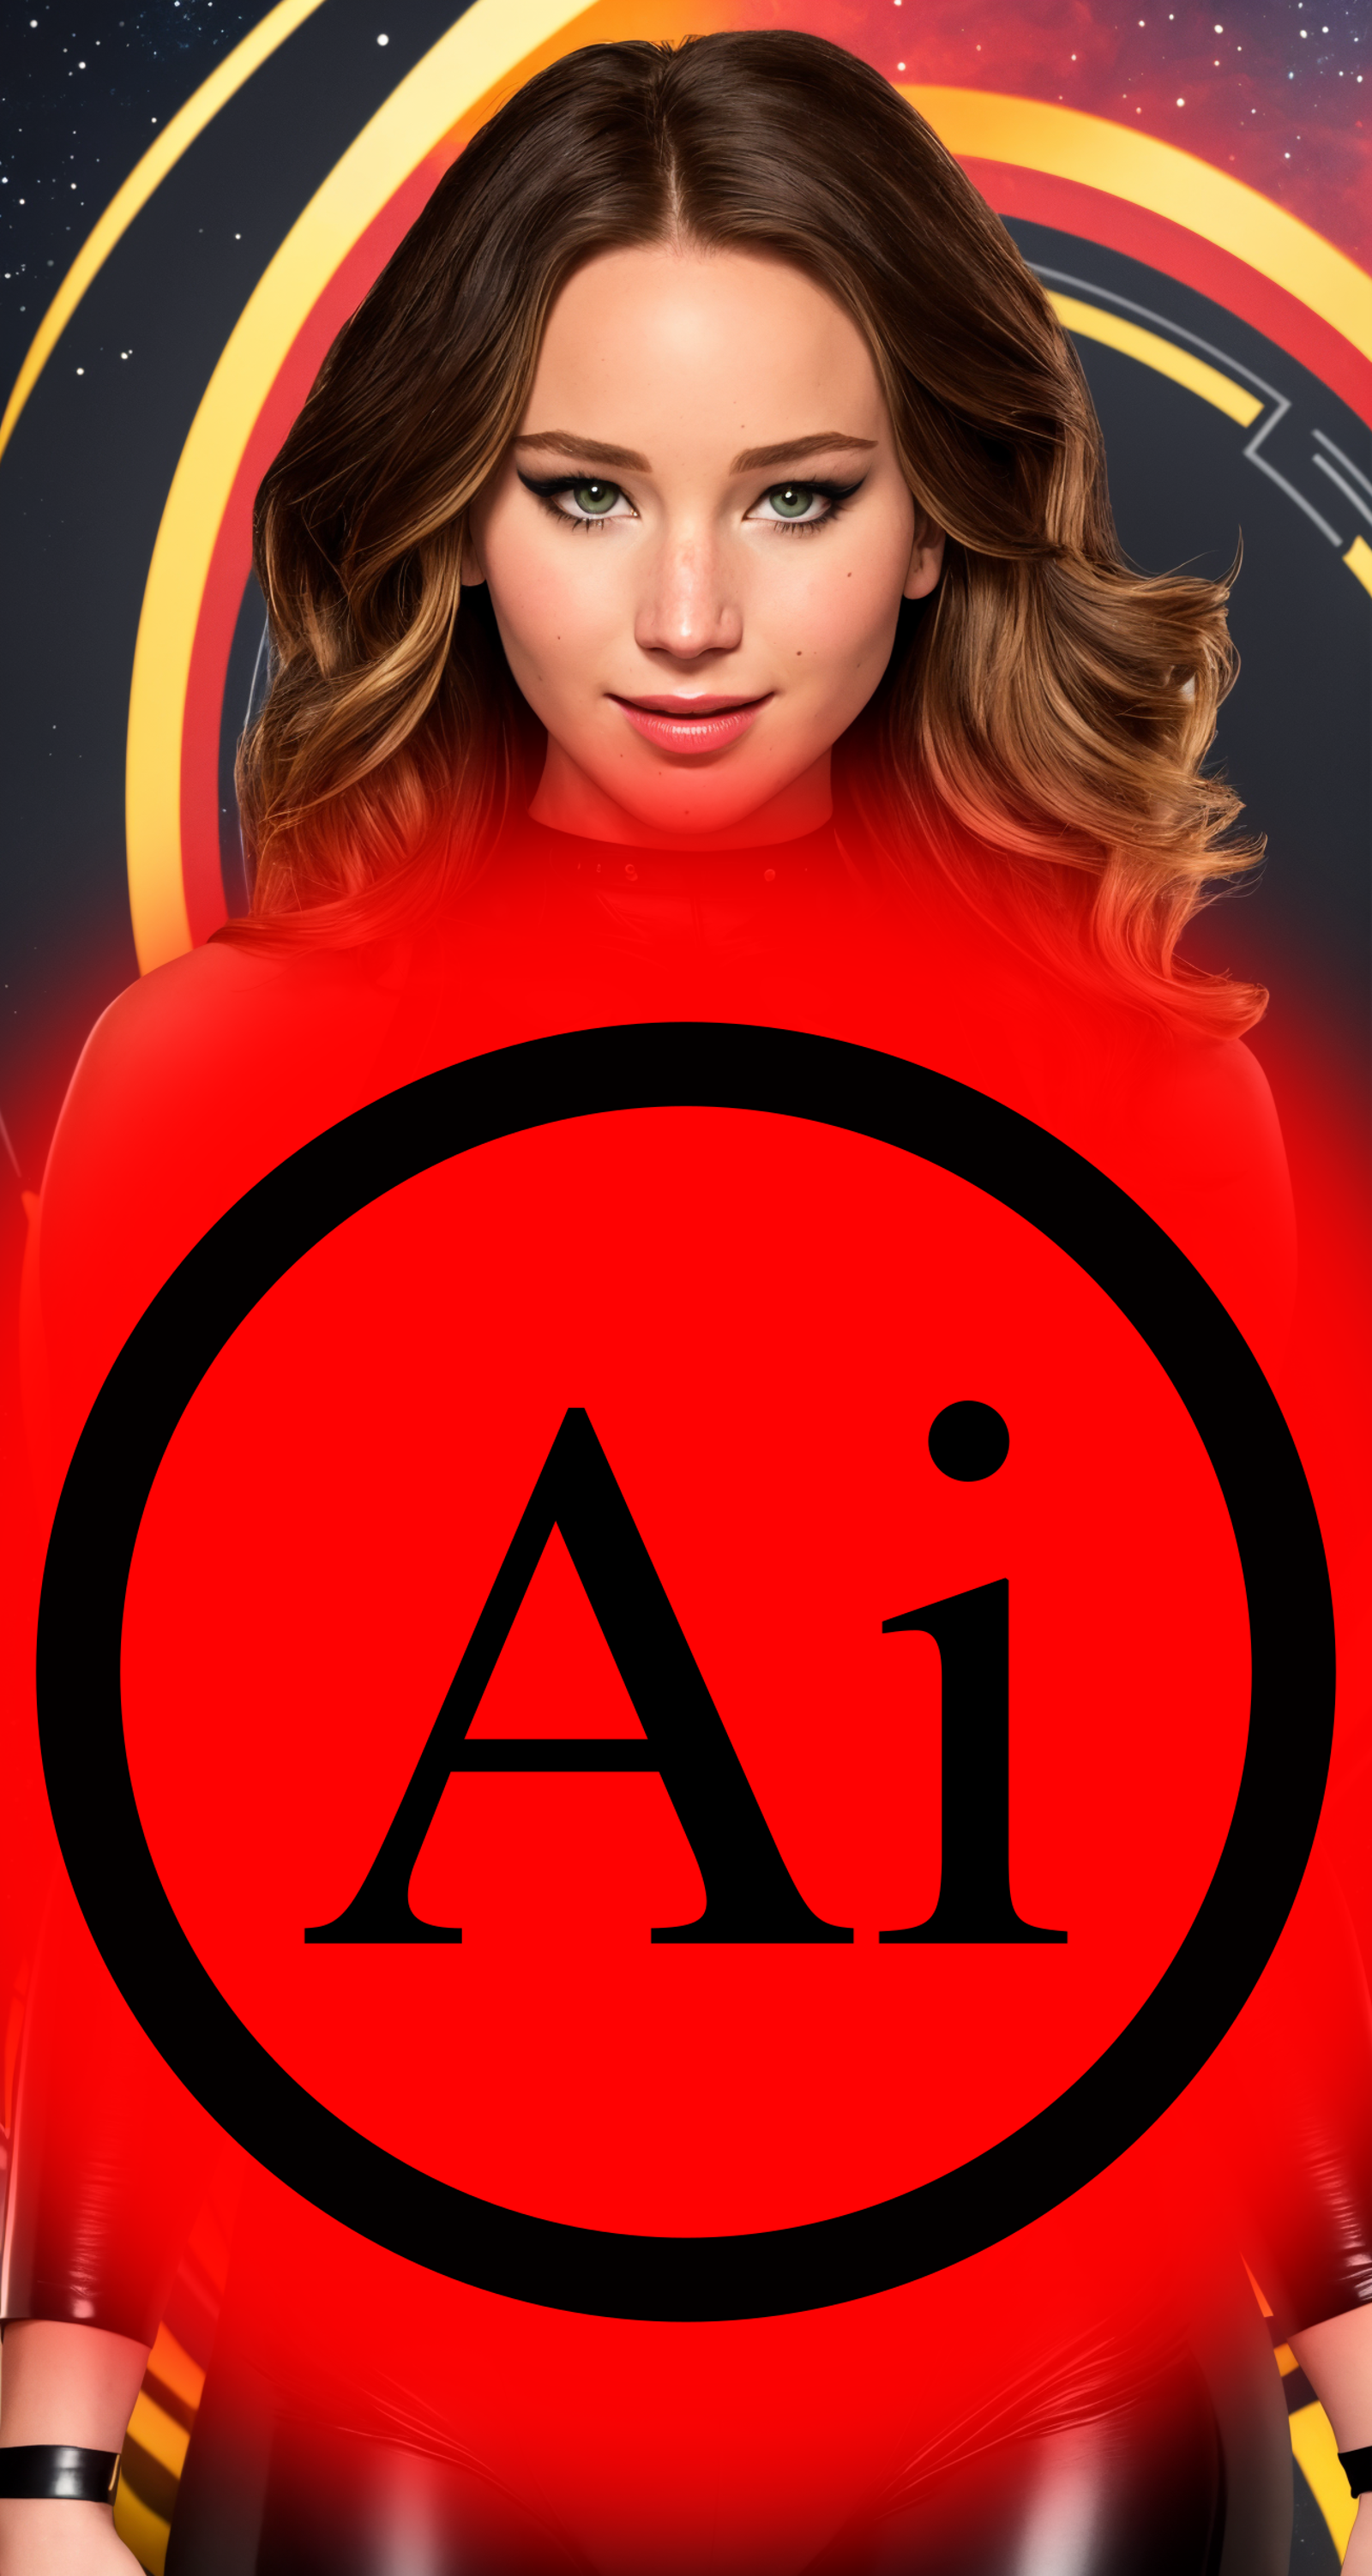 AI model image by alexds9